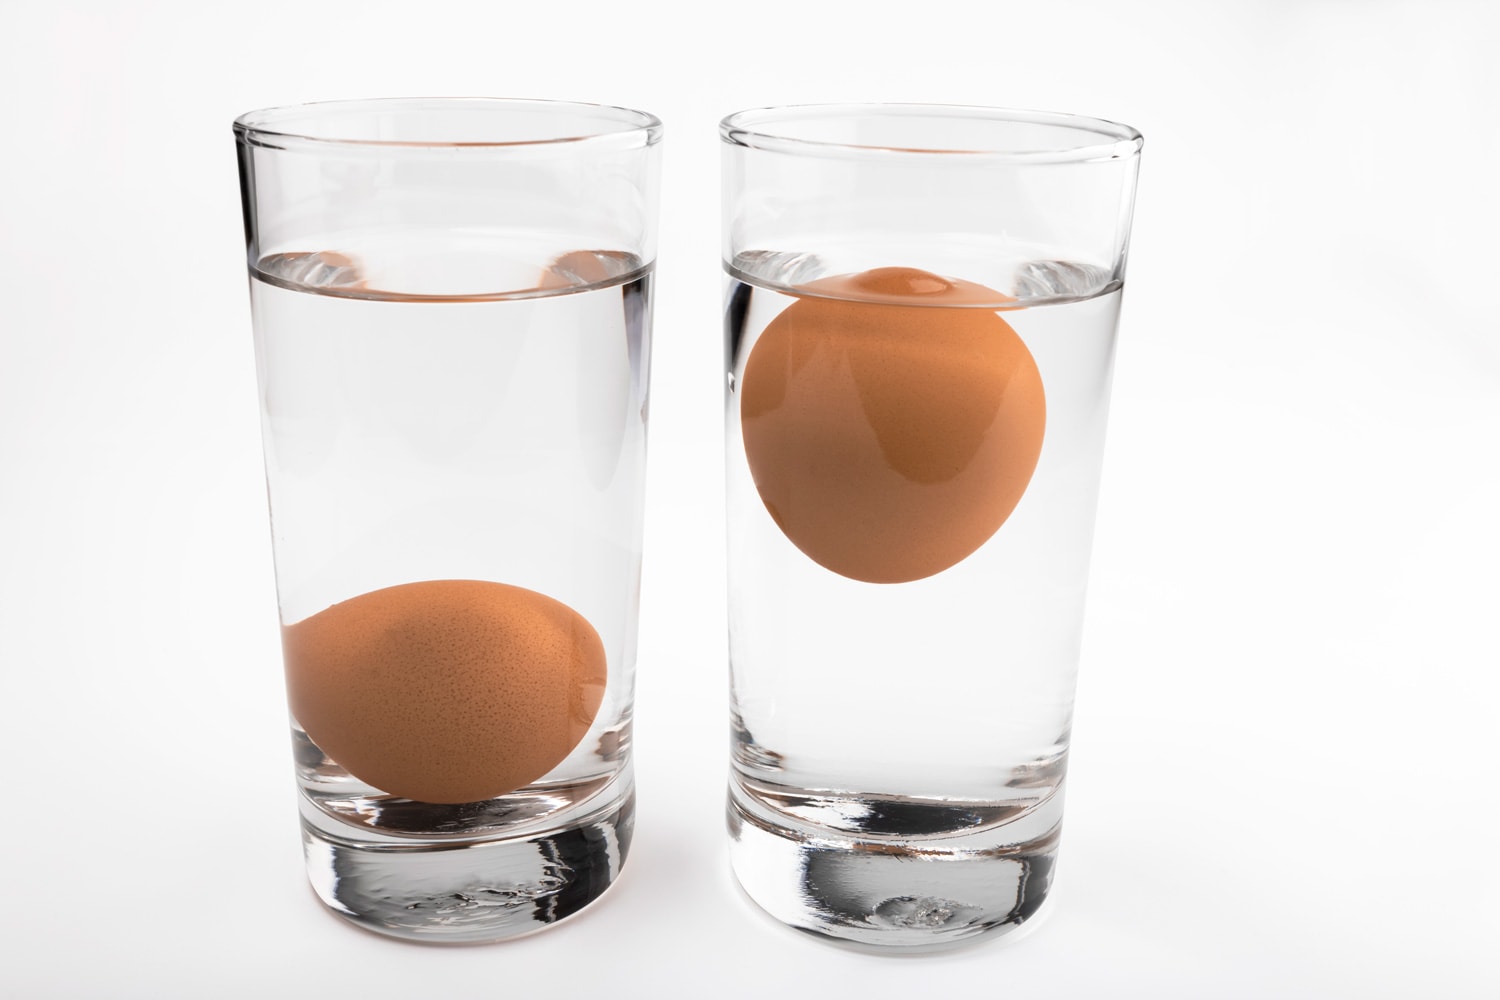 Egg in water test on transparent glass , Egg freshness test on white isolated background